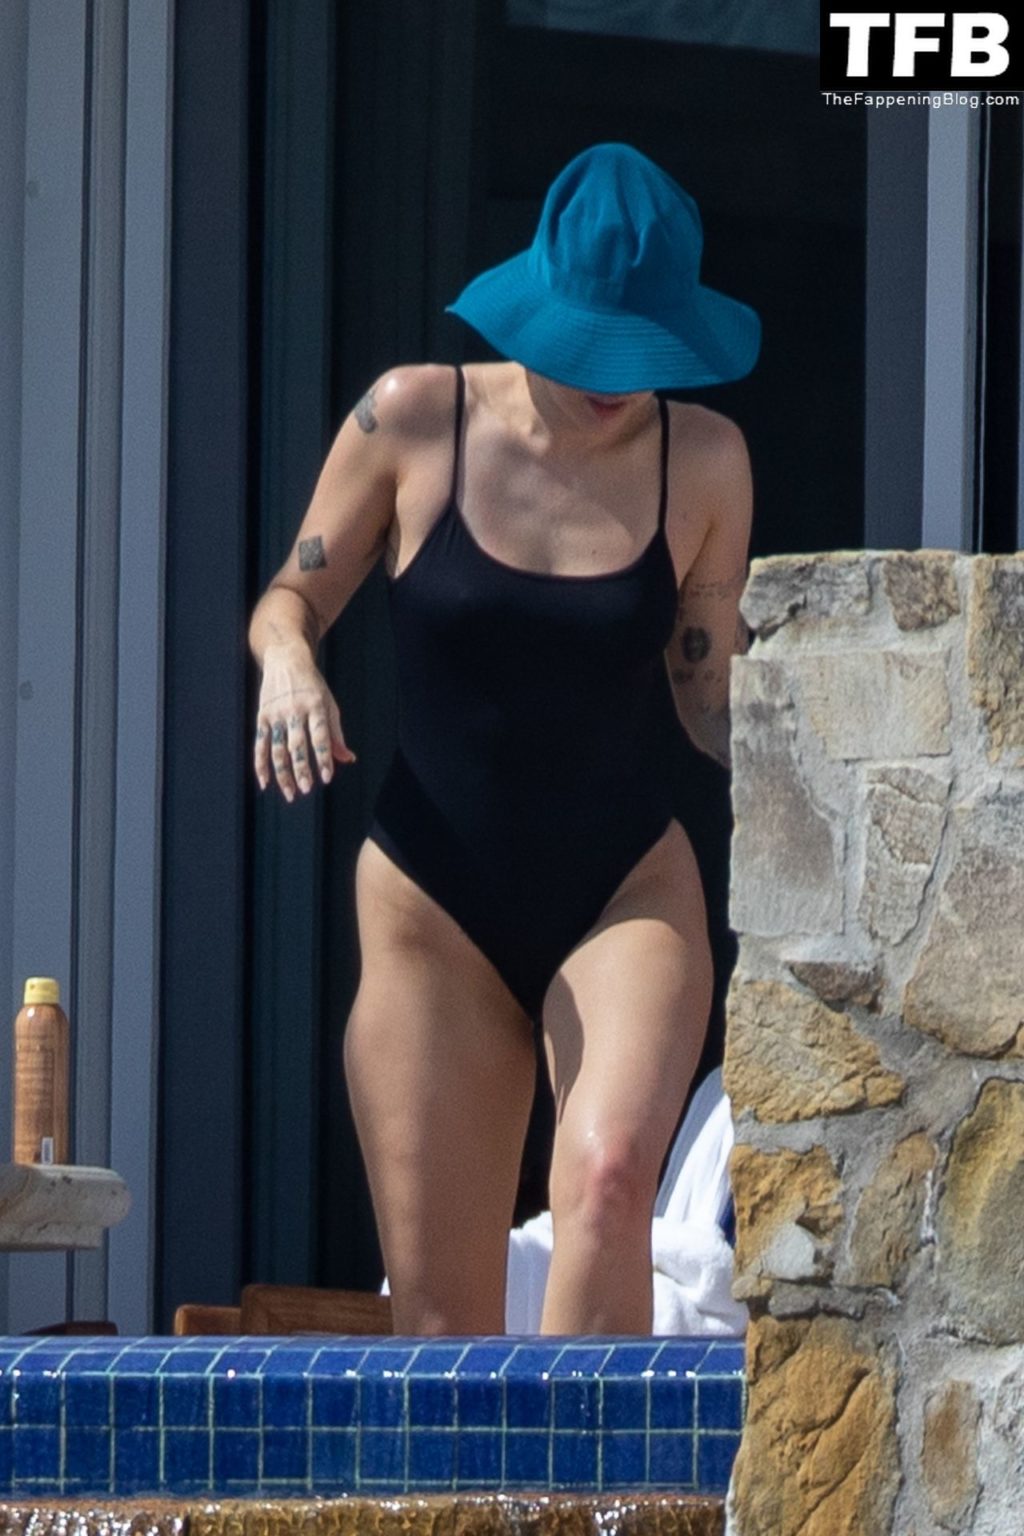 Miley Cyrus Sexy The Fappening Blog 21 1024x1536 - Miley Cyrus Brings Beach Body to Cabo San Lucas Alongside Her New Rumored Boyfriend (36 Photos)